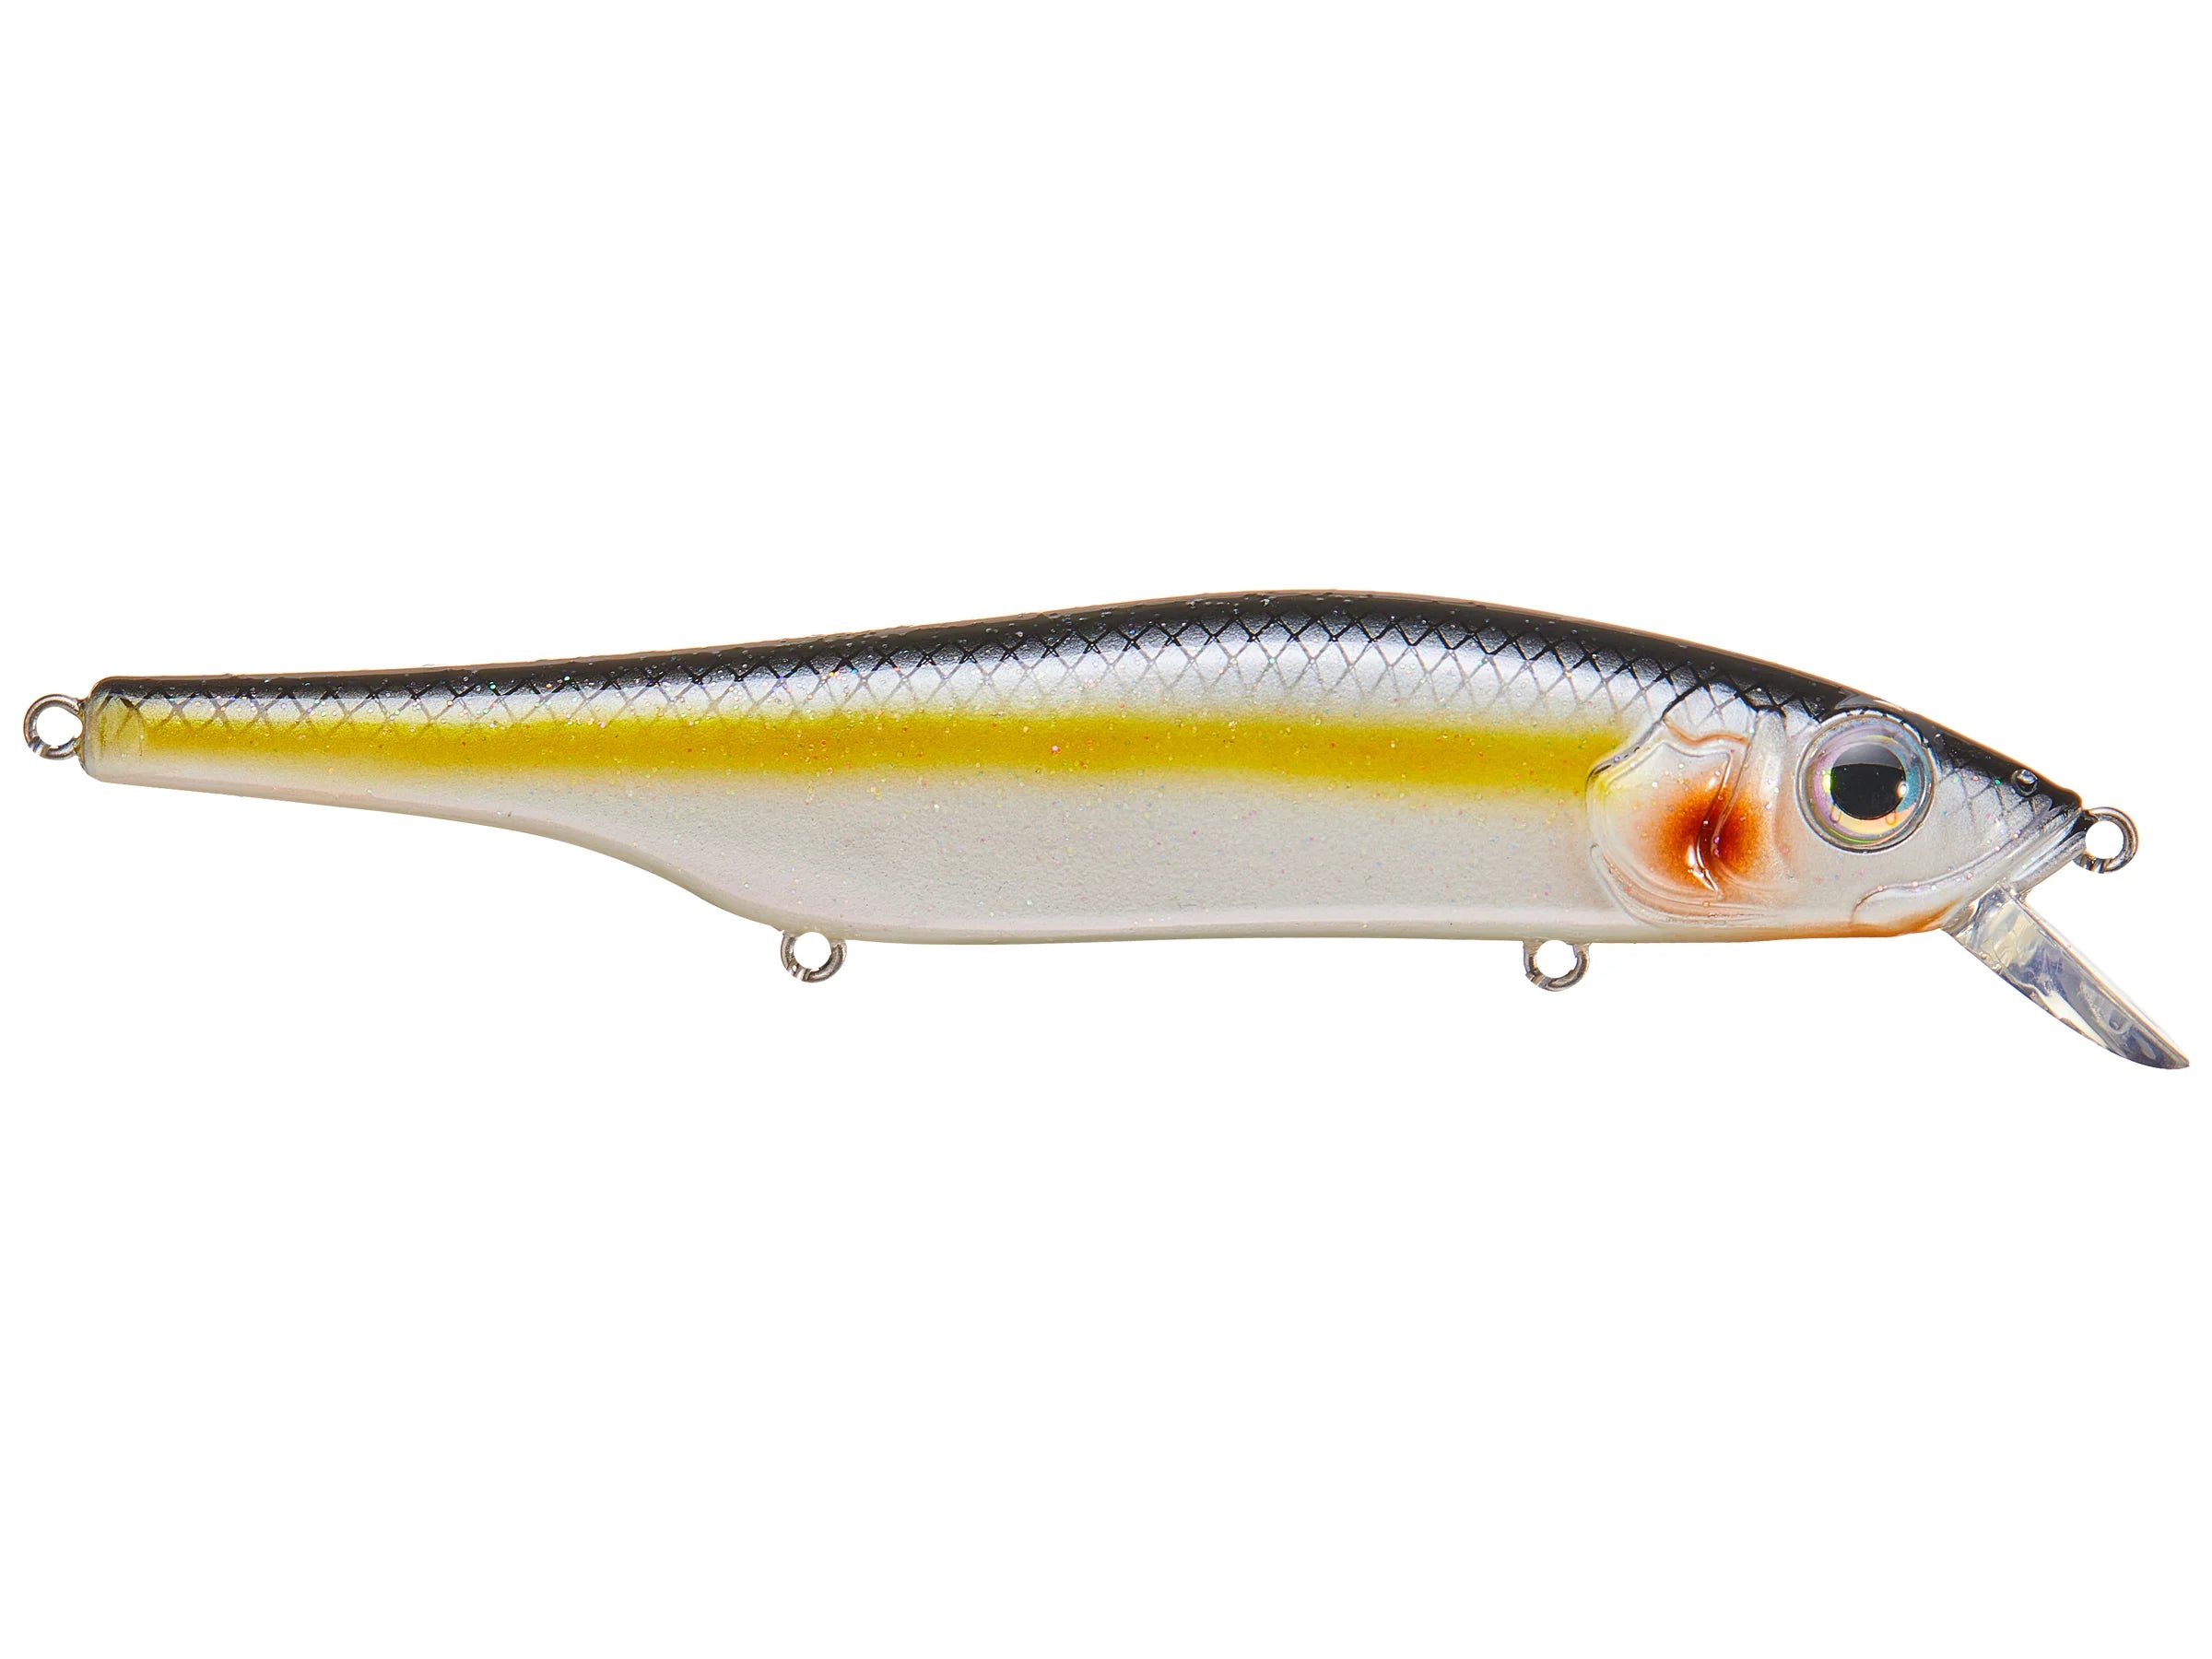 Scope Shad – The Hook Up Tackle